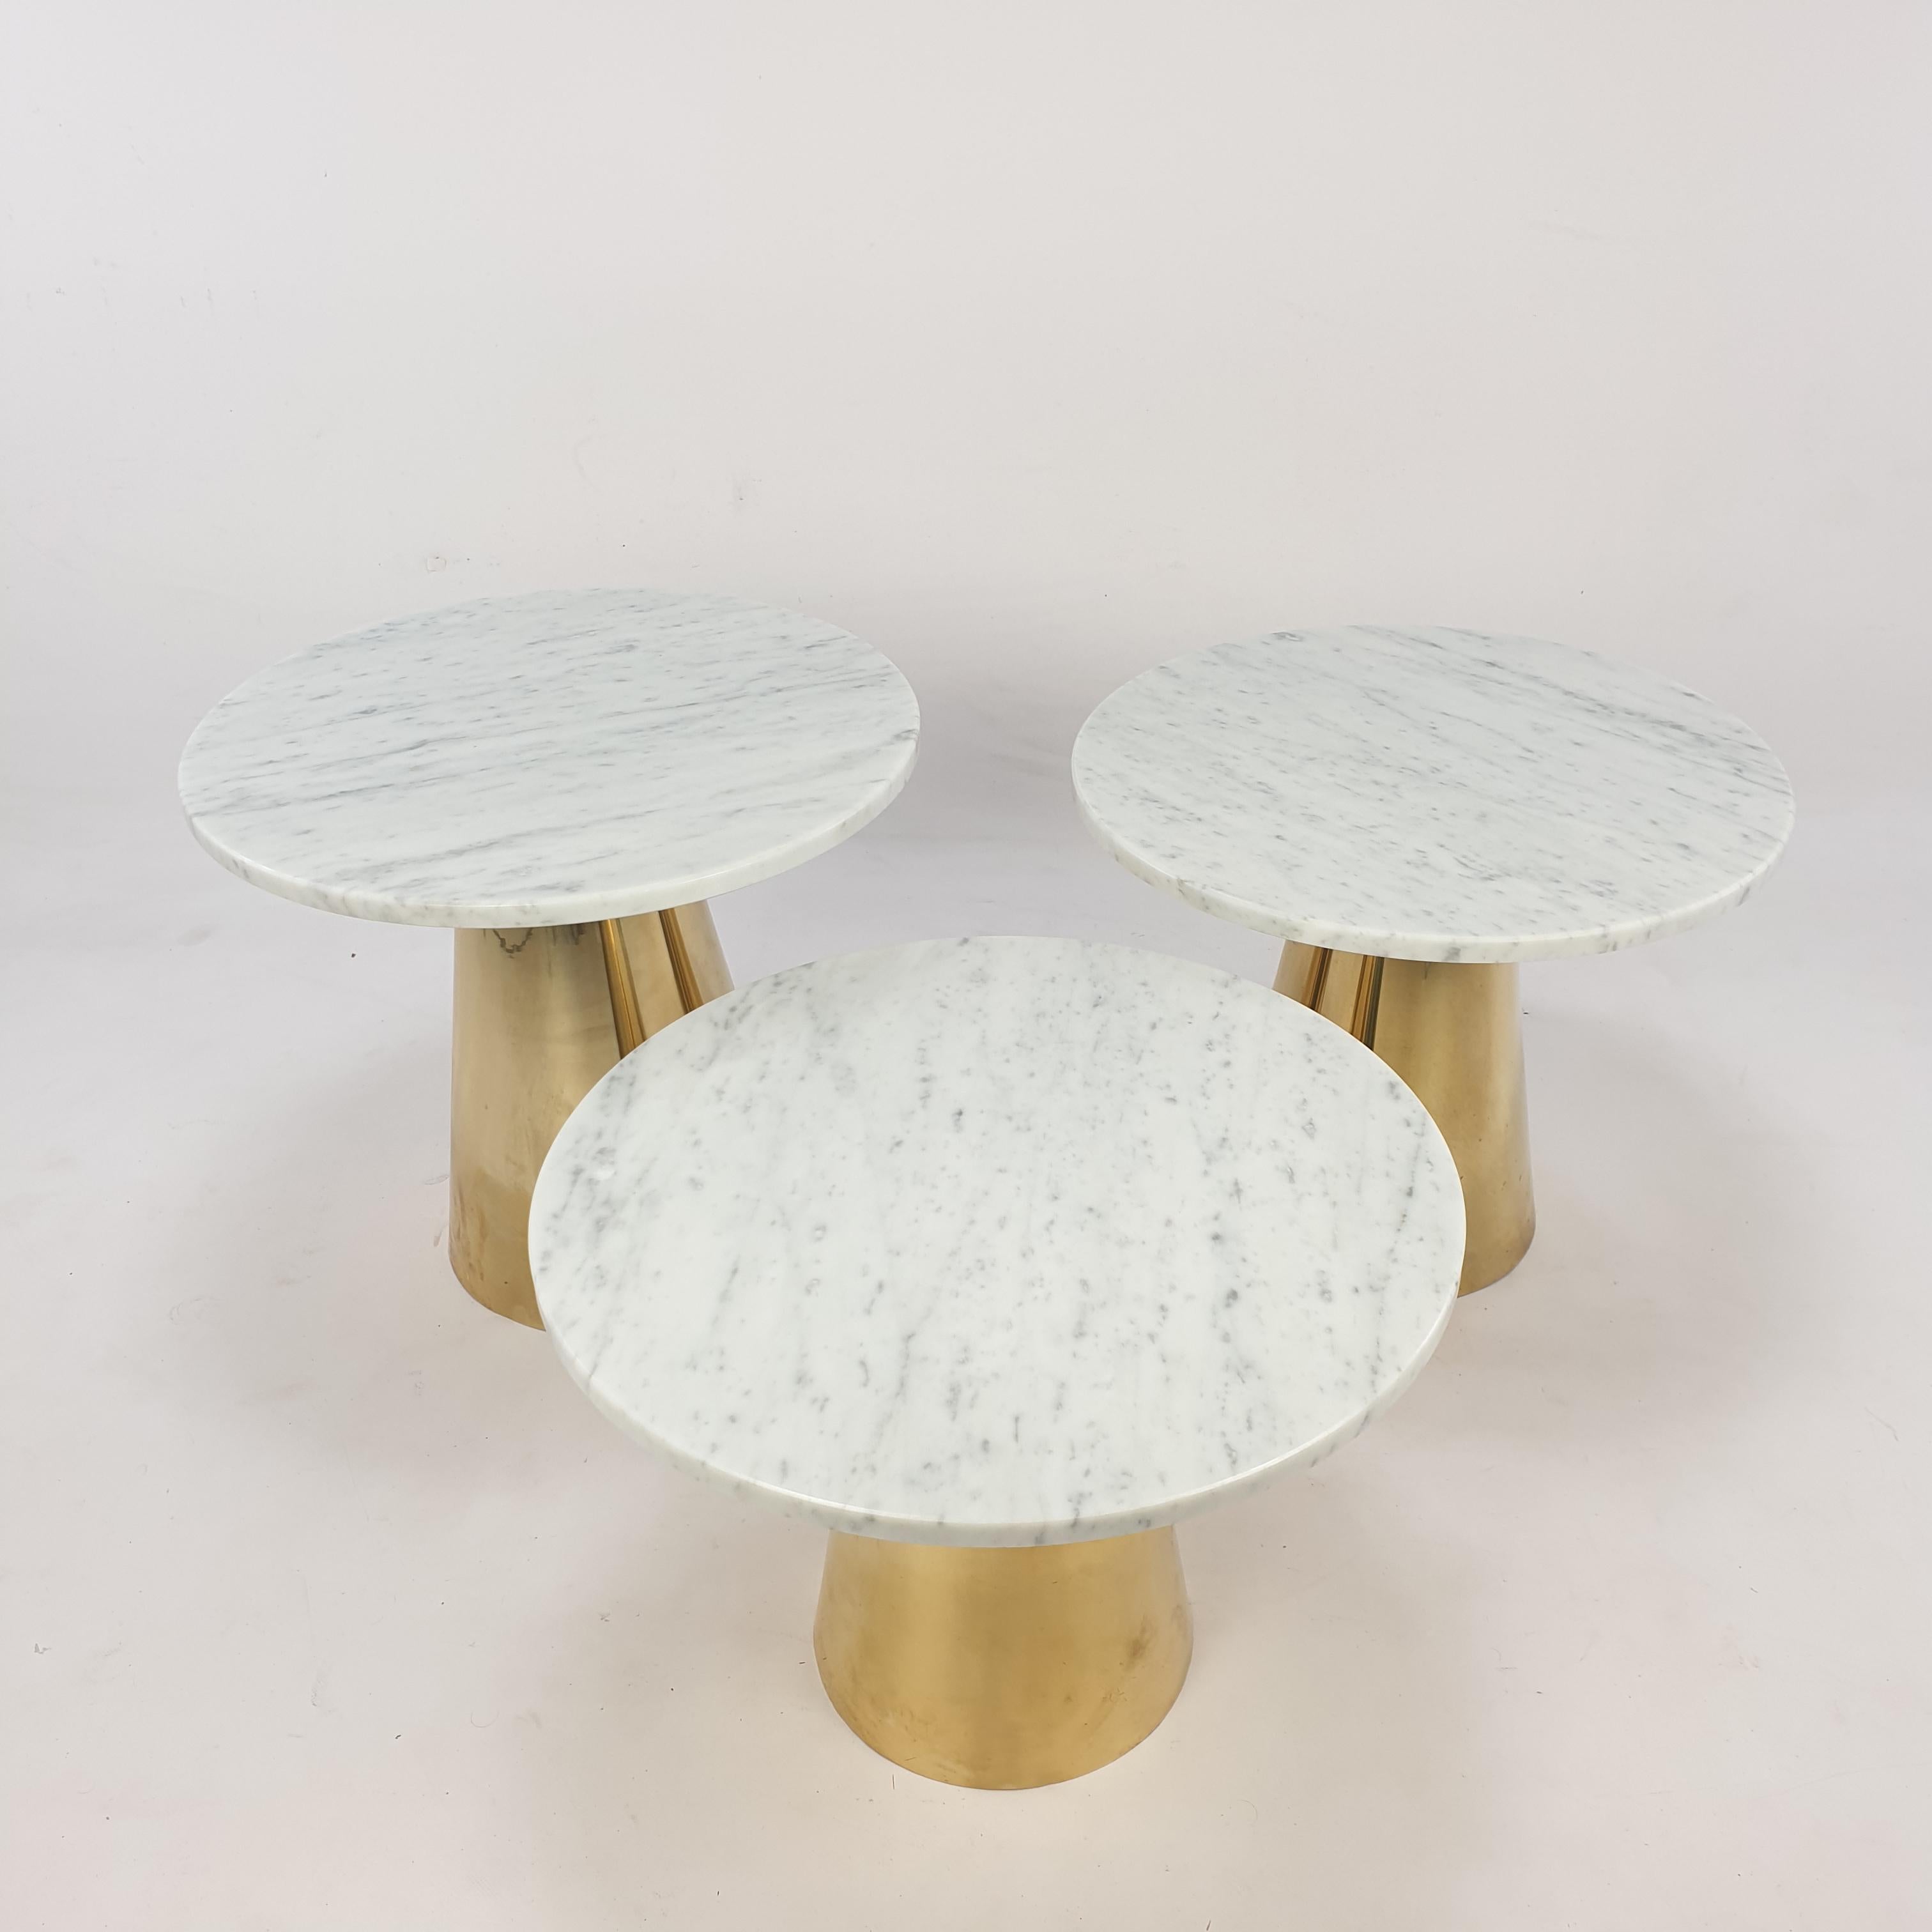 Lovely set of 3 Italian coffee or cocktail tables. They have a Carrara marble round plate with a brass base. All tables have a different hight, the plates have the same size.